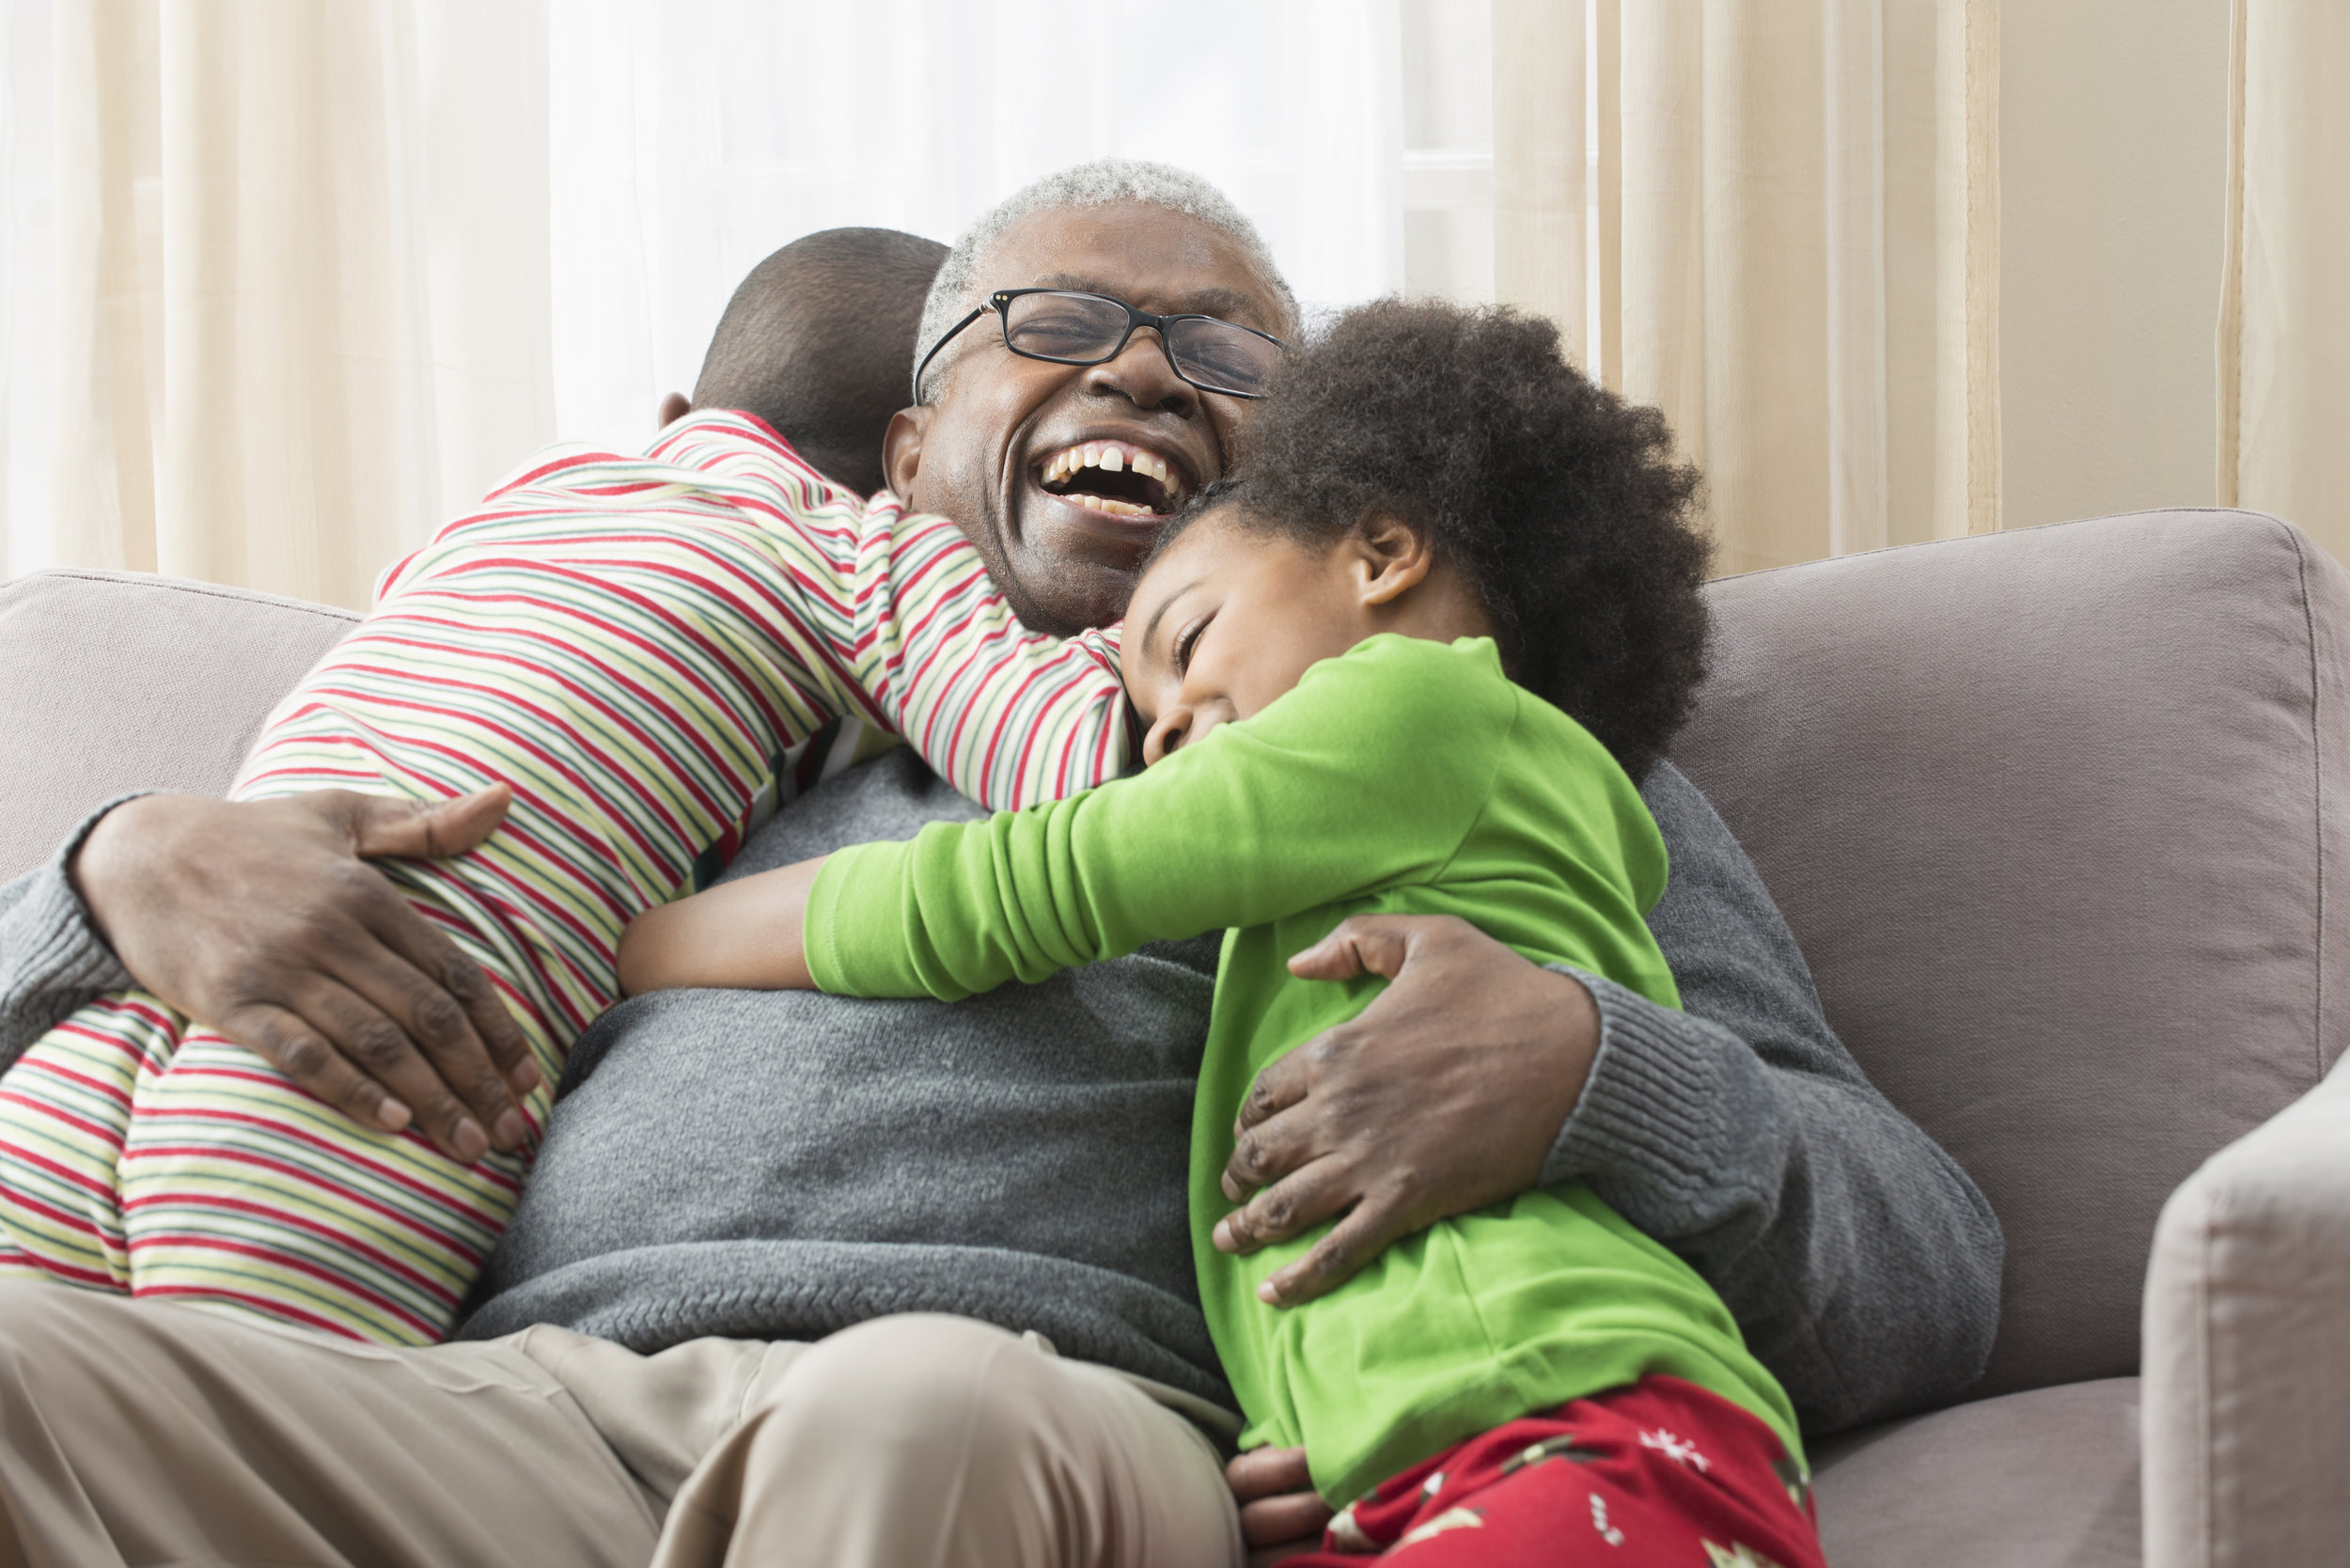 Make the Most of Your Time with Grandparents